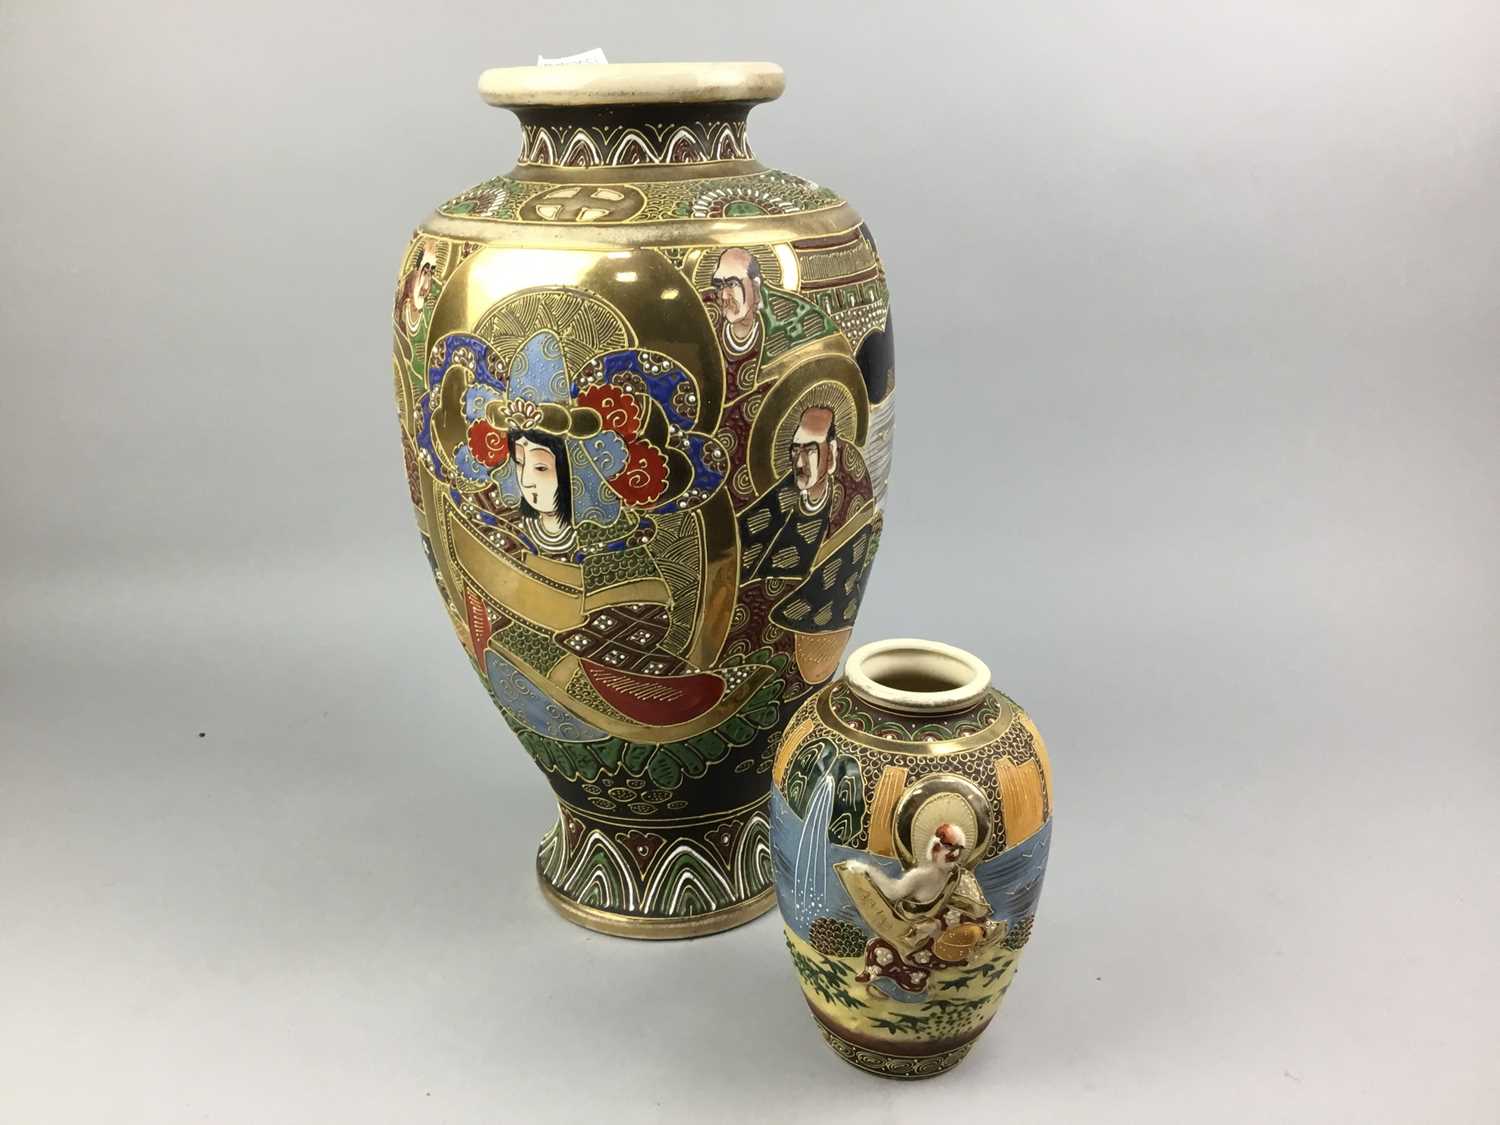 Lot 14 - A LOT OF TWO EARLY 20TH CENTURY JAPANESE SATSUMA VASES